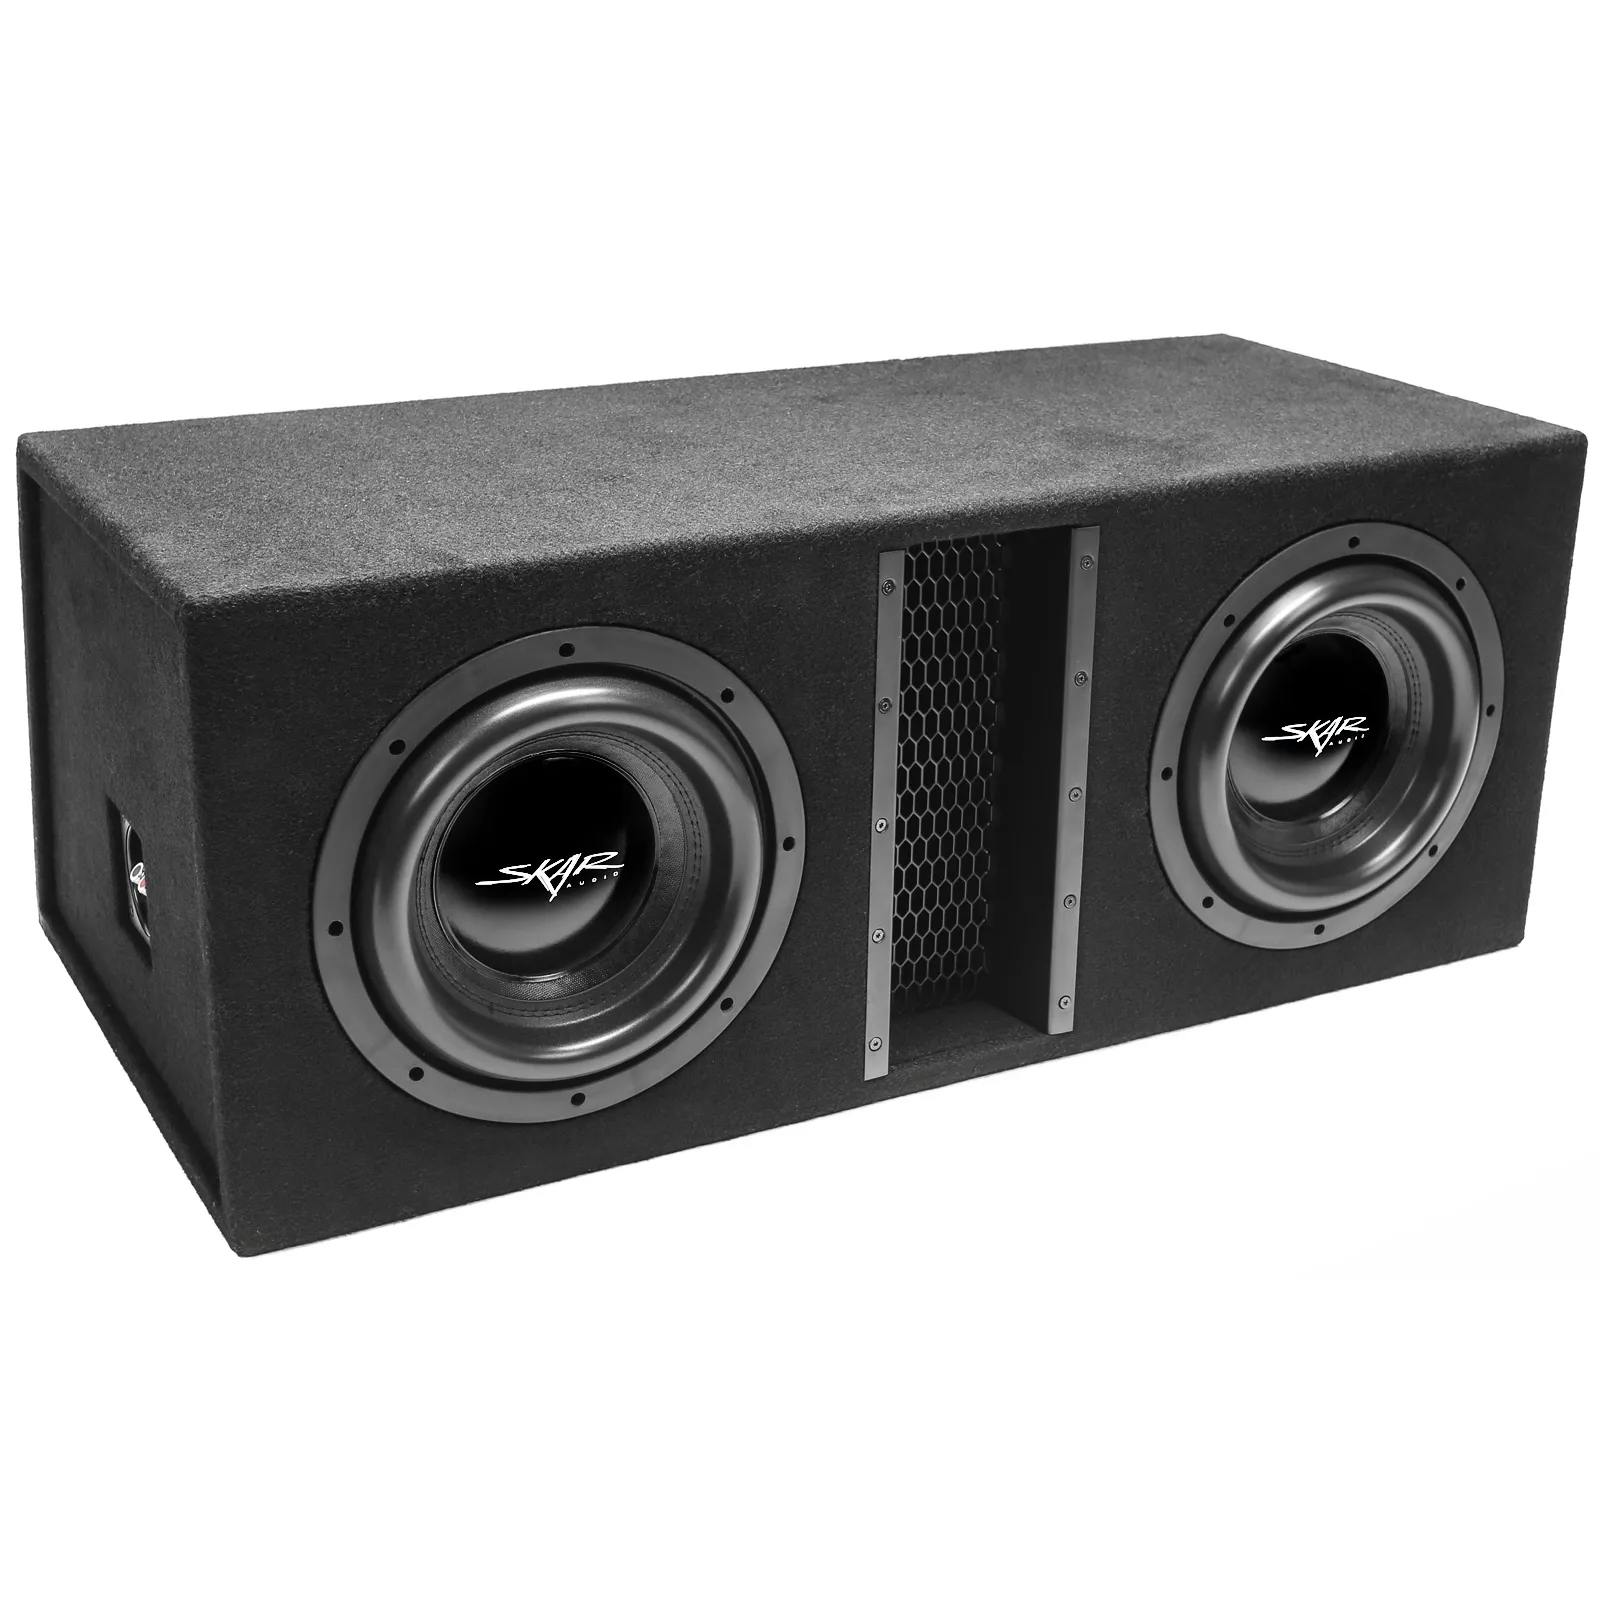 Featured Product Photo for EVL-2X10D4 | Dual 10" 4,000 Watt EVL Series Loaded Vented Subwoofer Enclosure